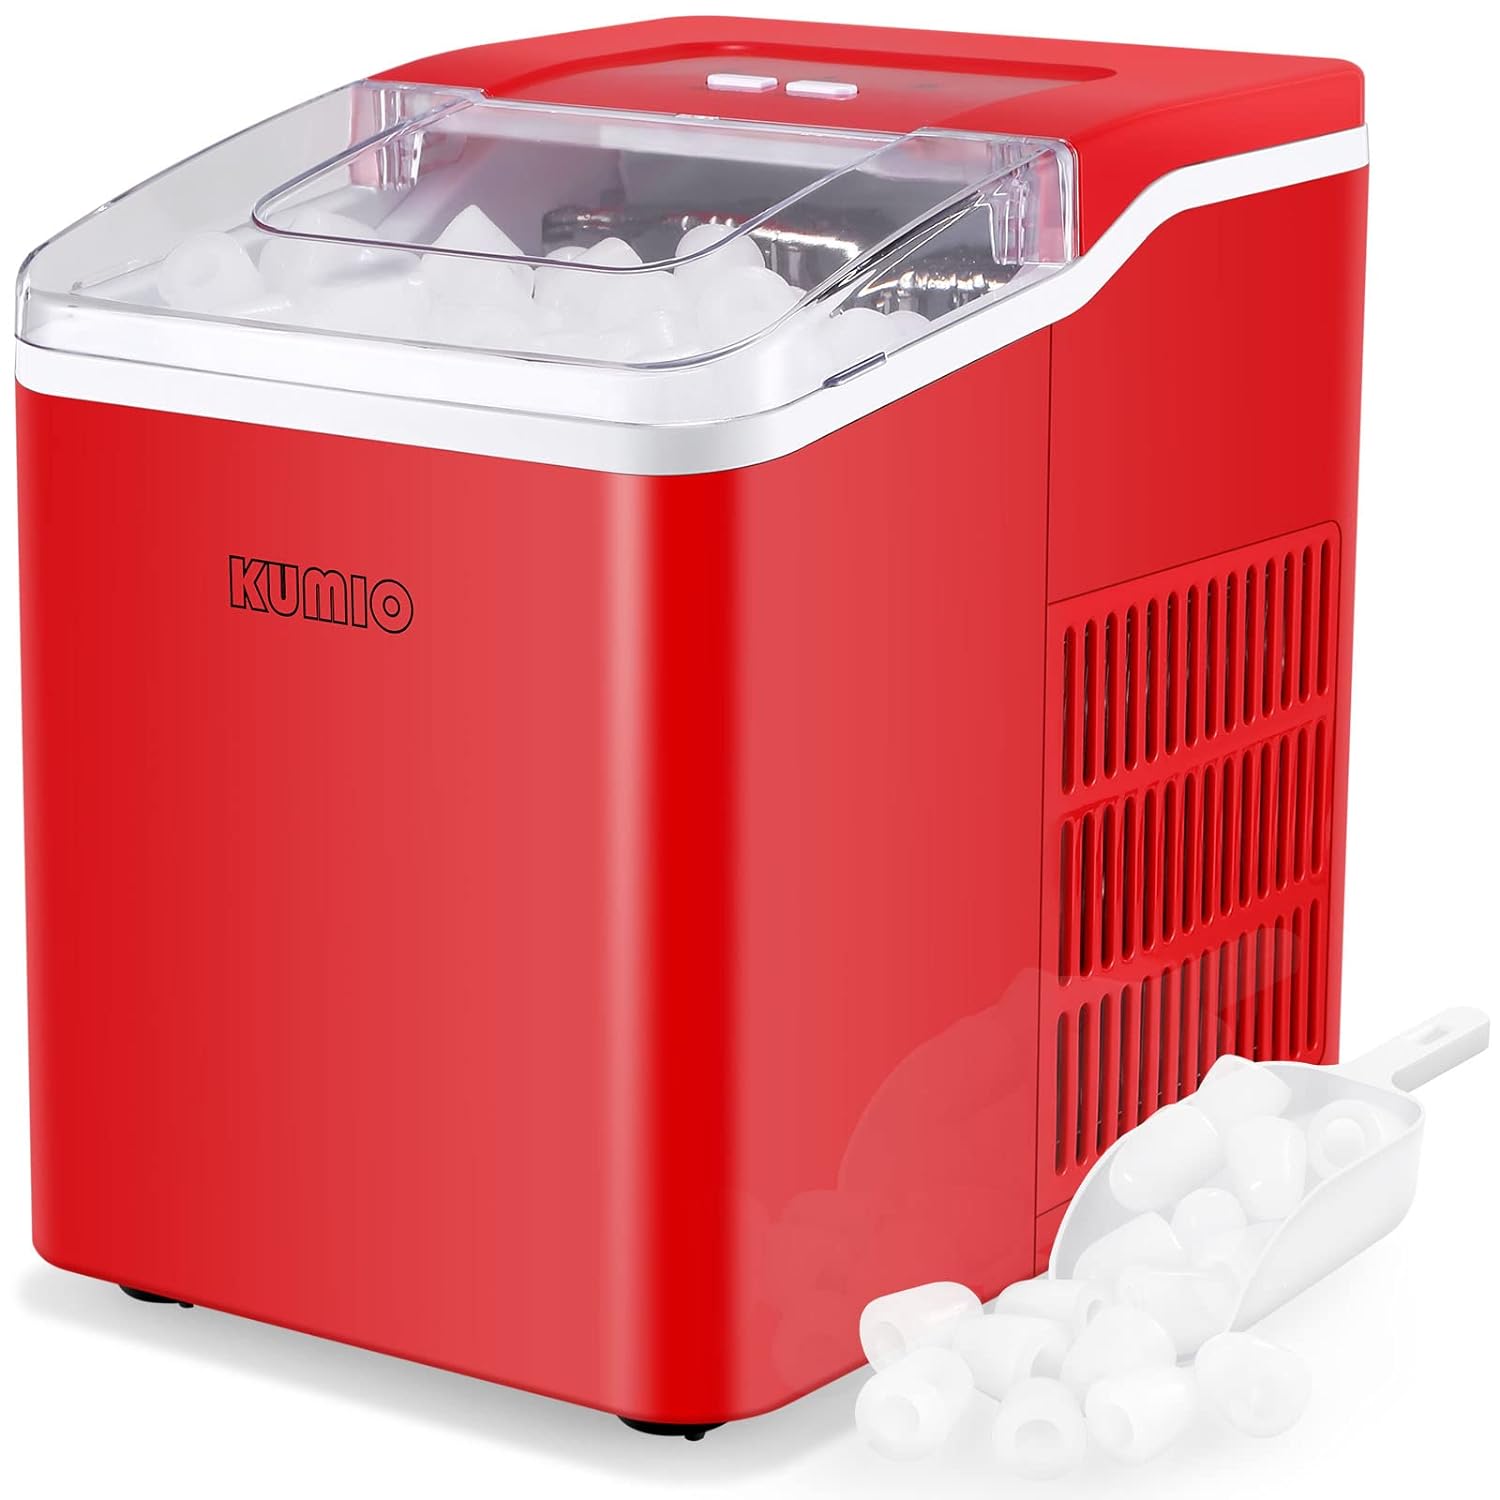 Product works great, as expected. It' a bit more noisier than I would like, but the level is still acceptable. A great substitute for my fridge ice maker.